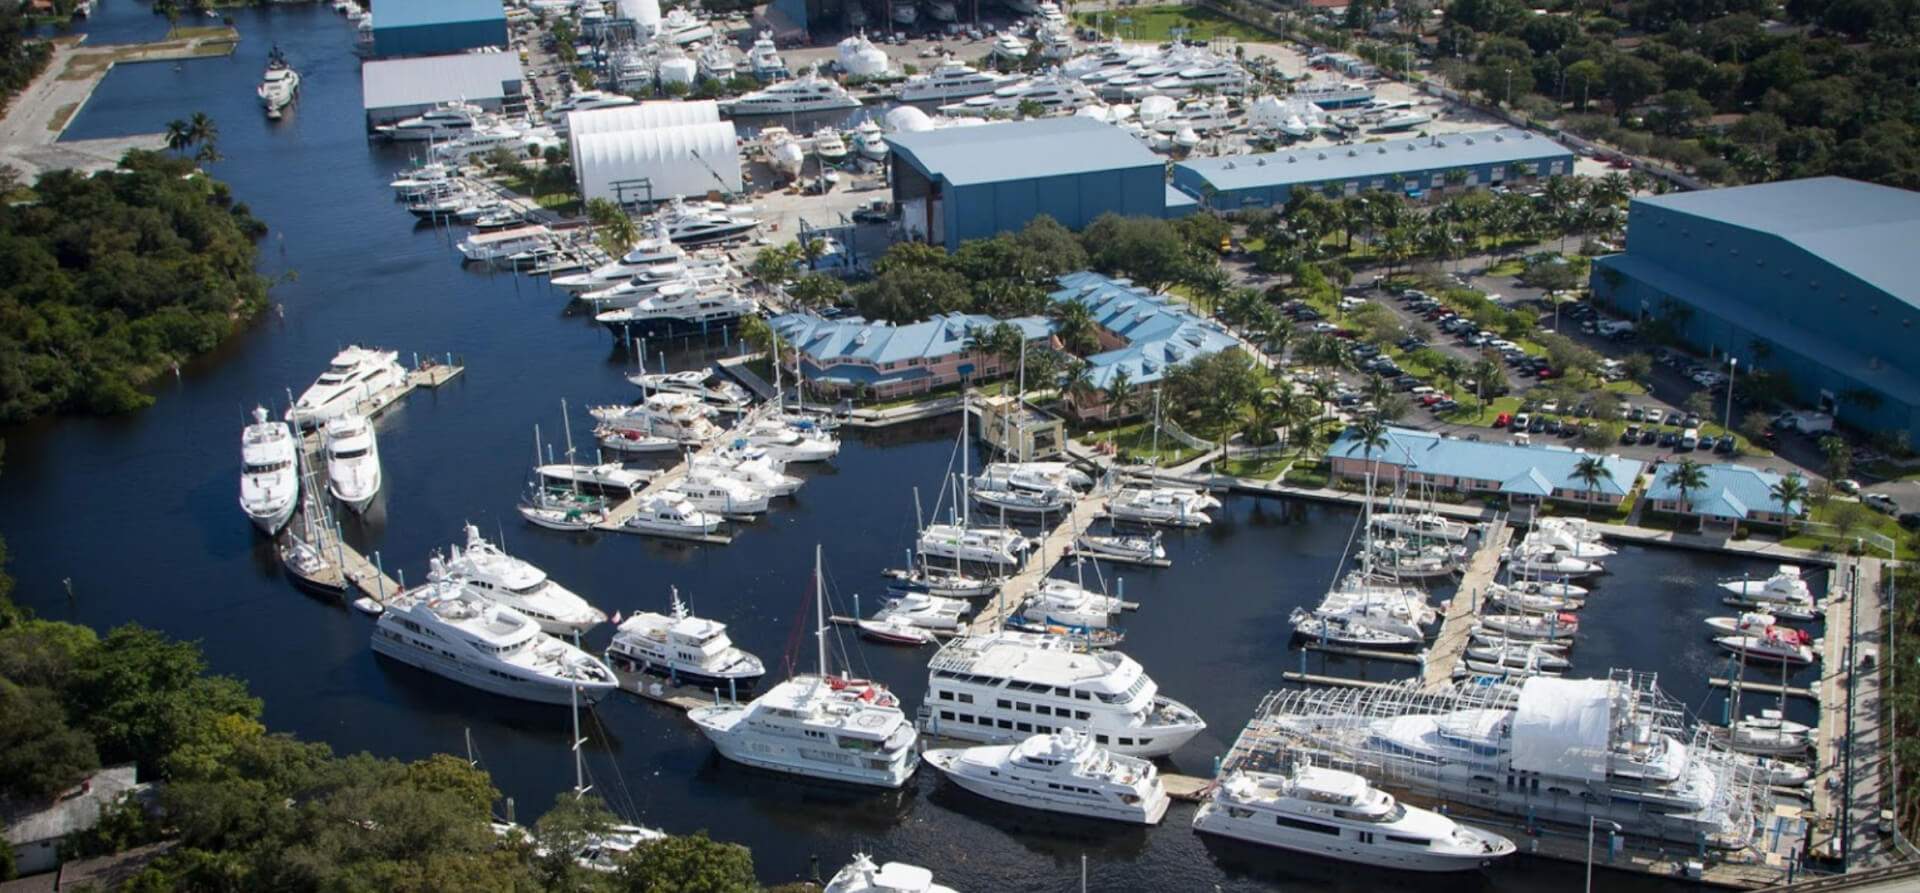 Cheoy Lee Yachts facilities in Fort Lauderdale